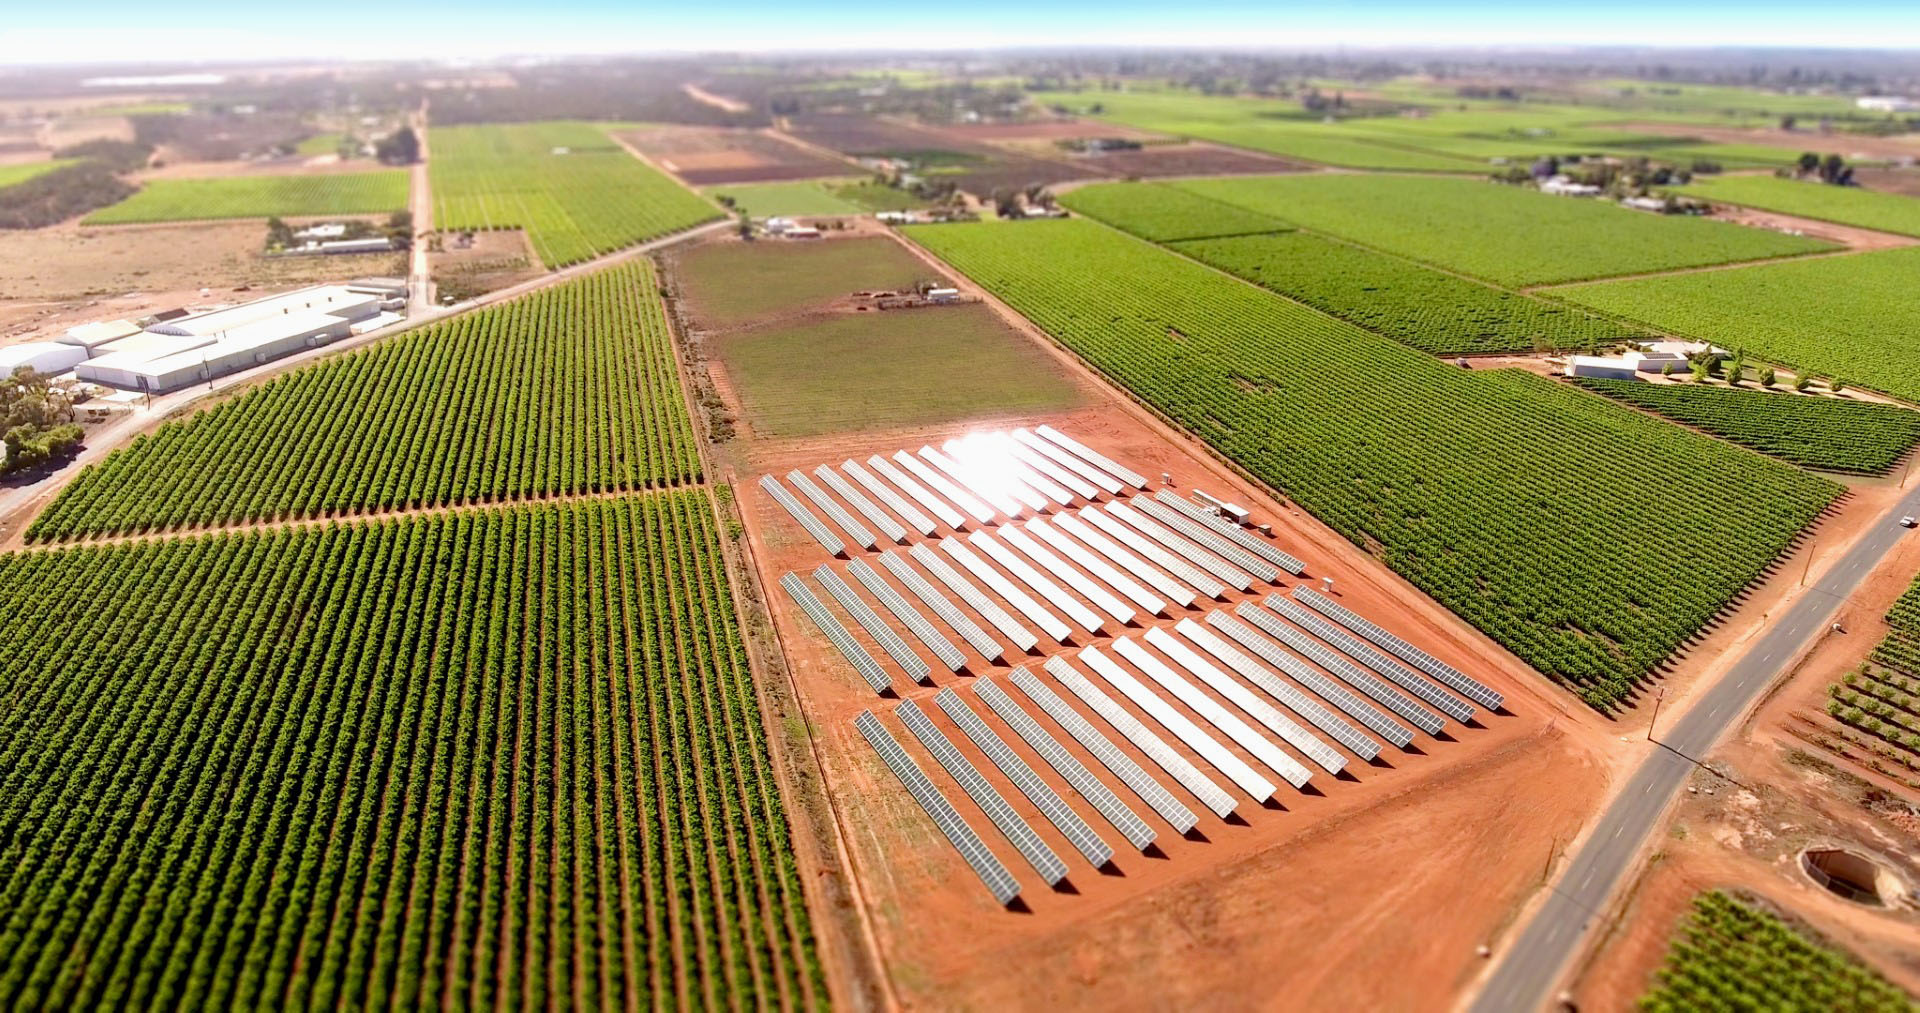 The photo shows solar panels on a portion of unused land at a vineyard in Monash, South Australia